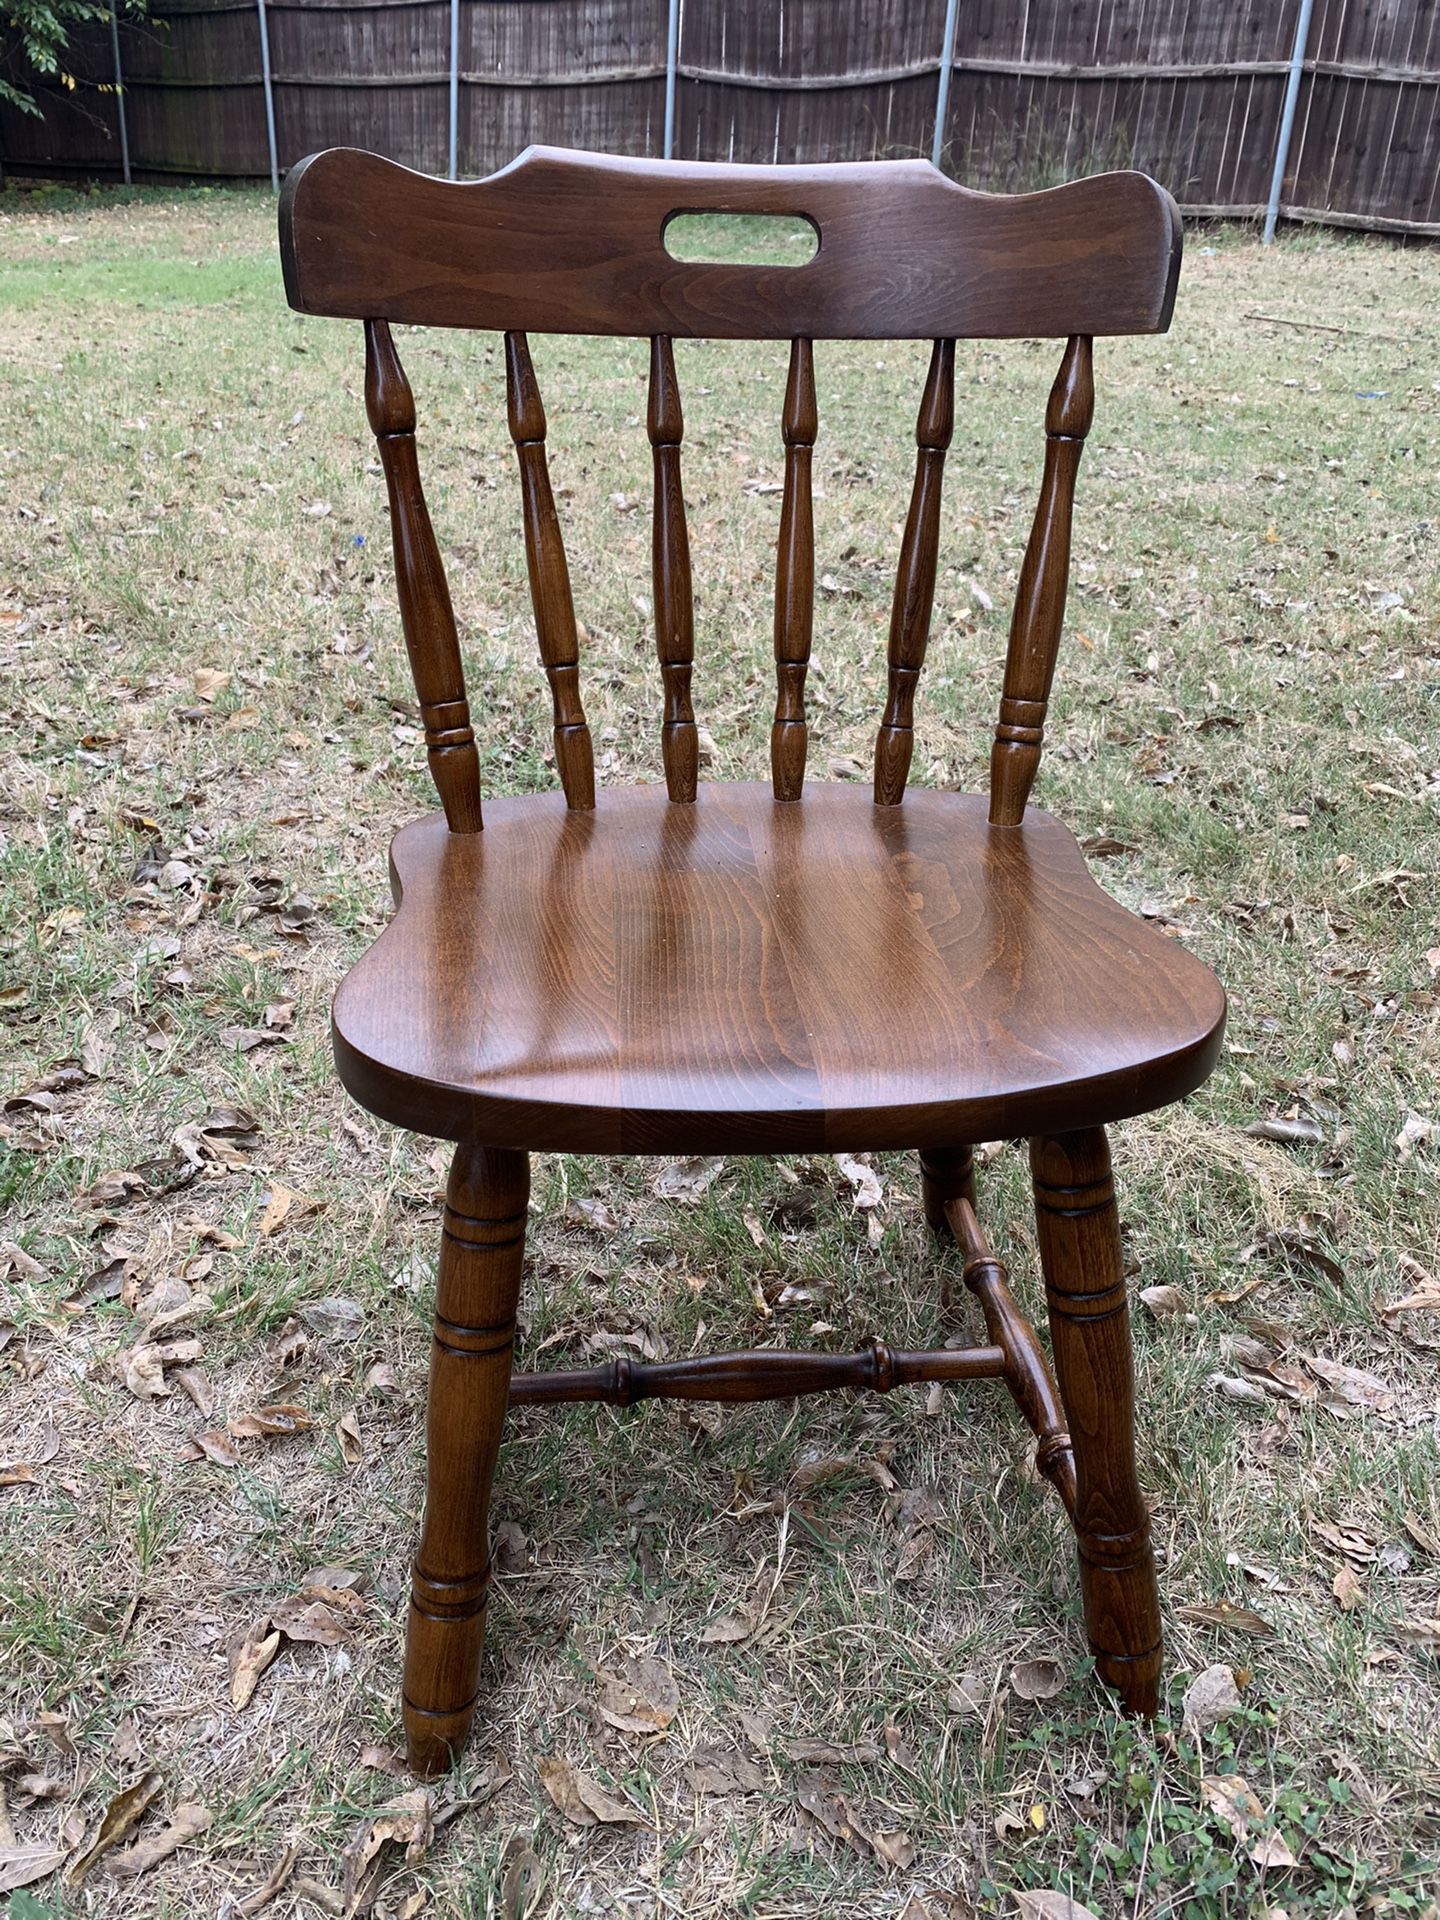 A single wooden chair